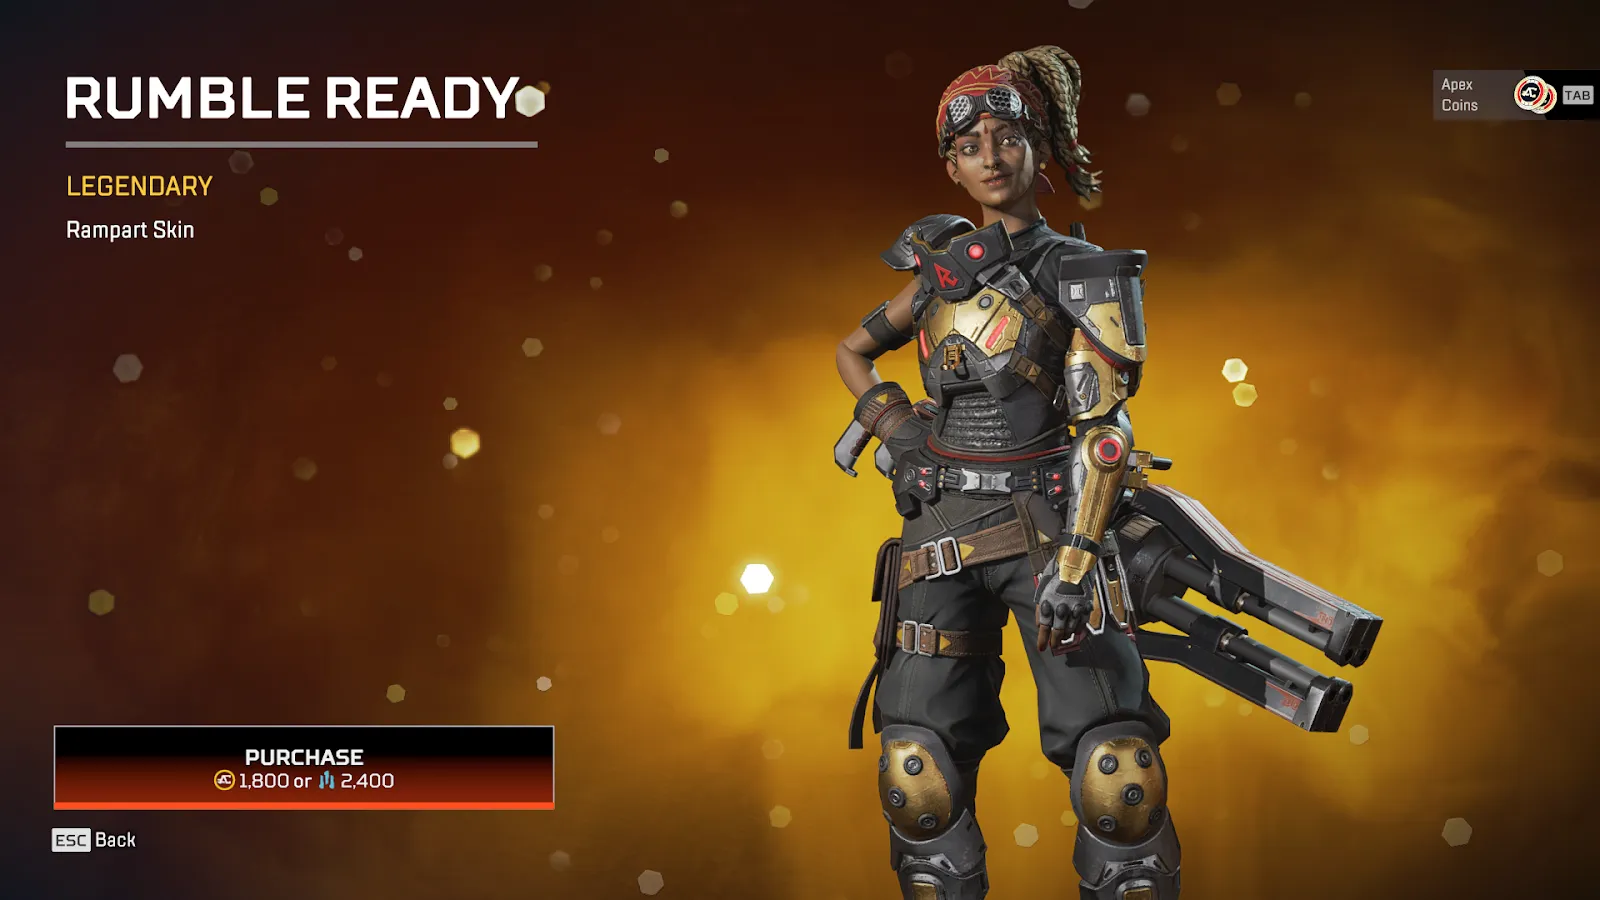 The Rumble Ready skin in Apex Legends